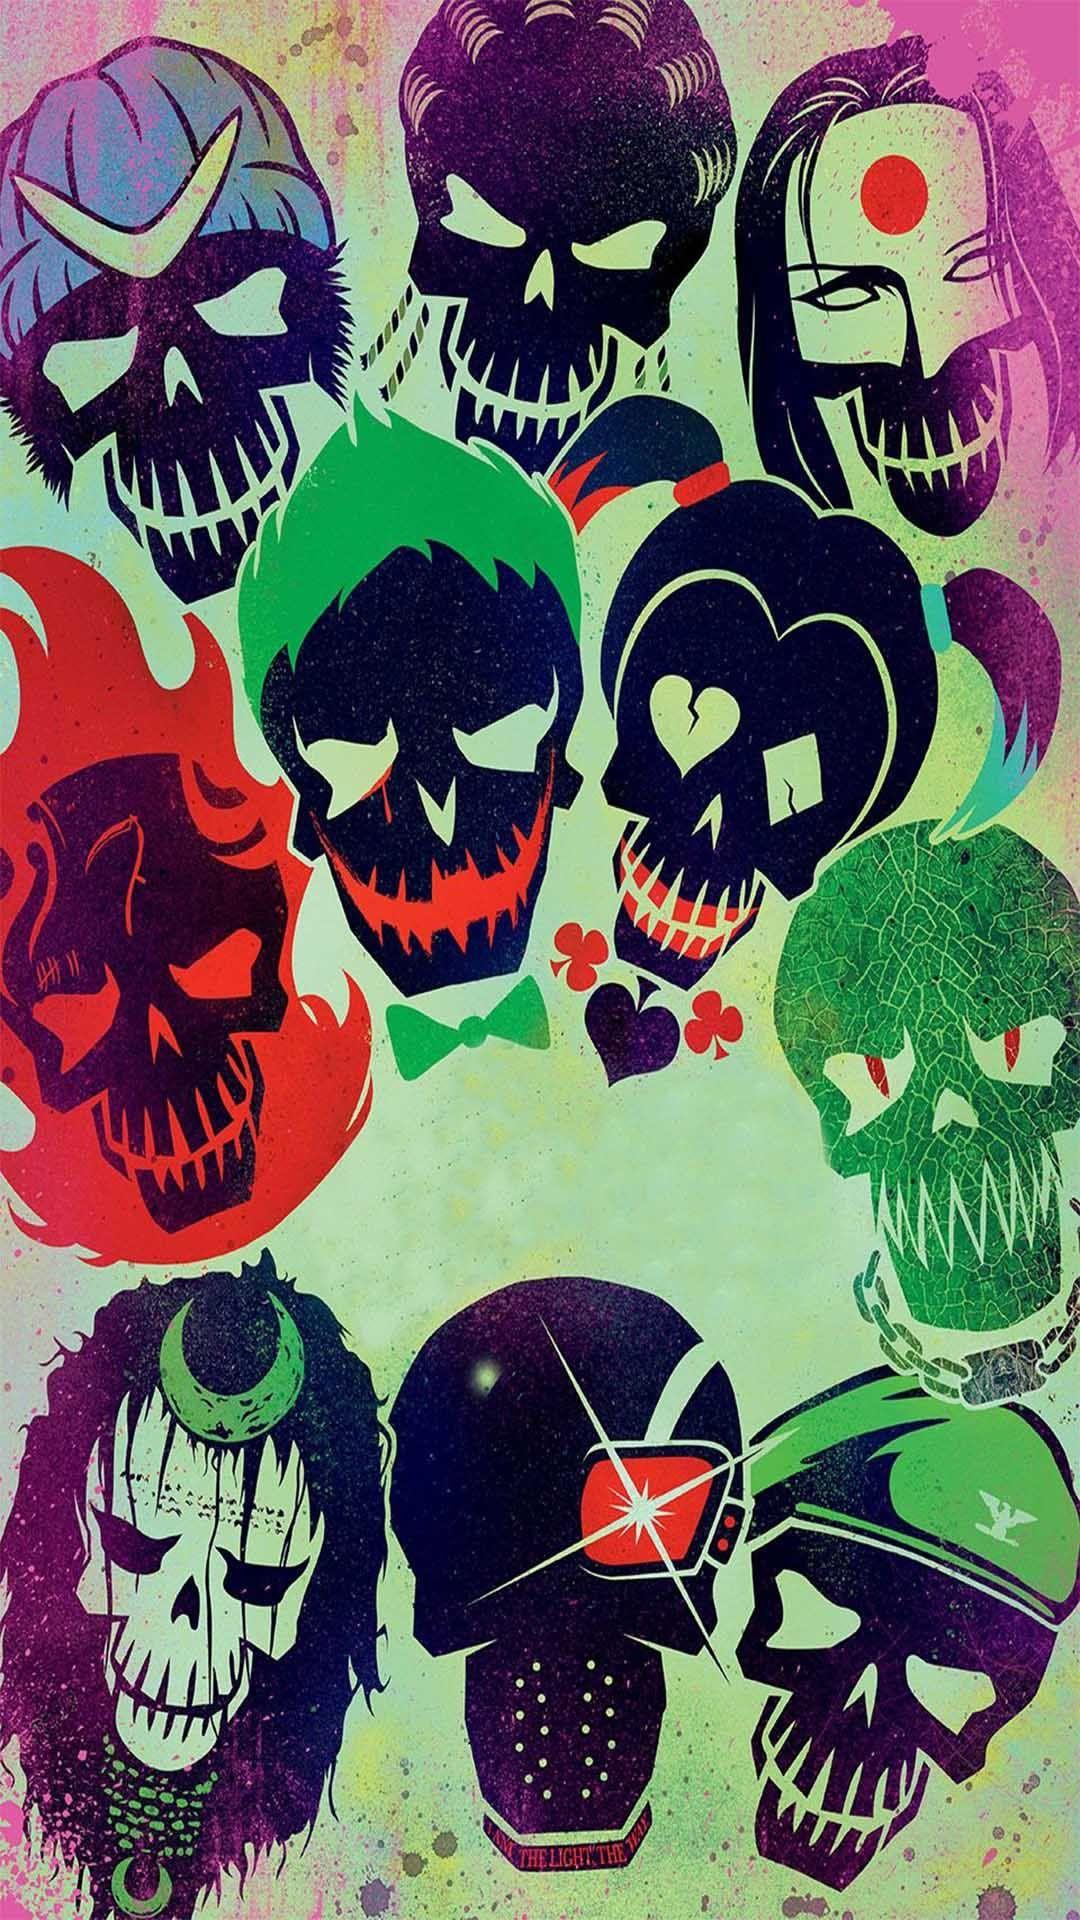 Suicide Squad Wallpaper for iPhone X, 6